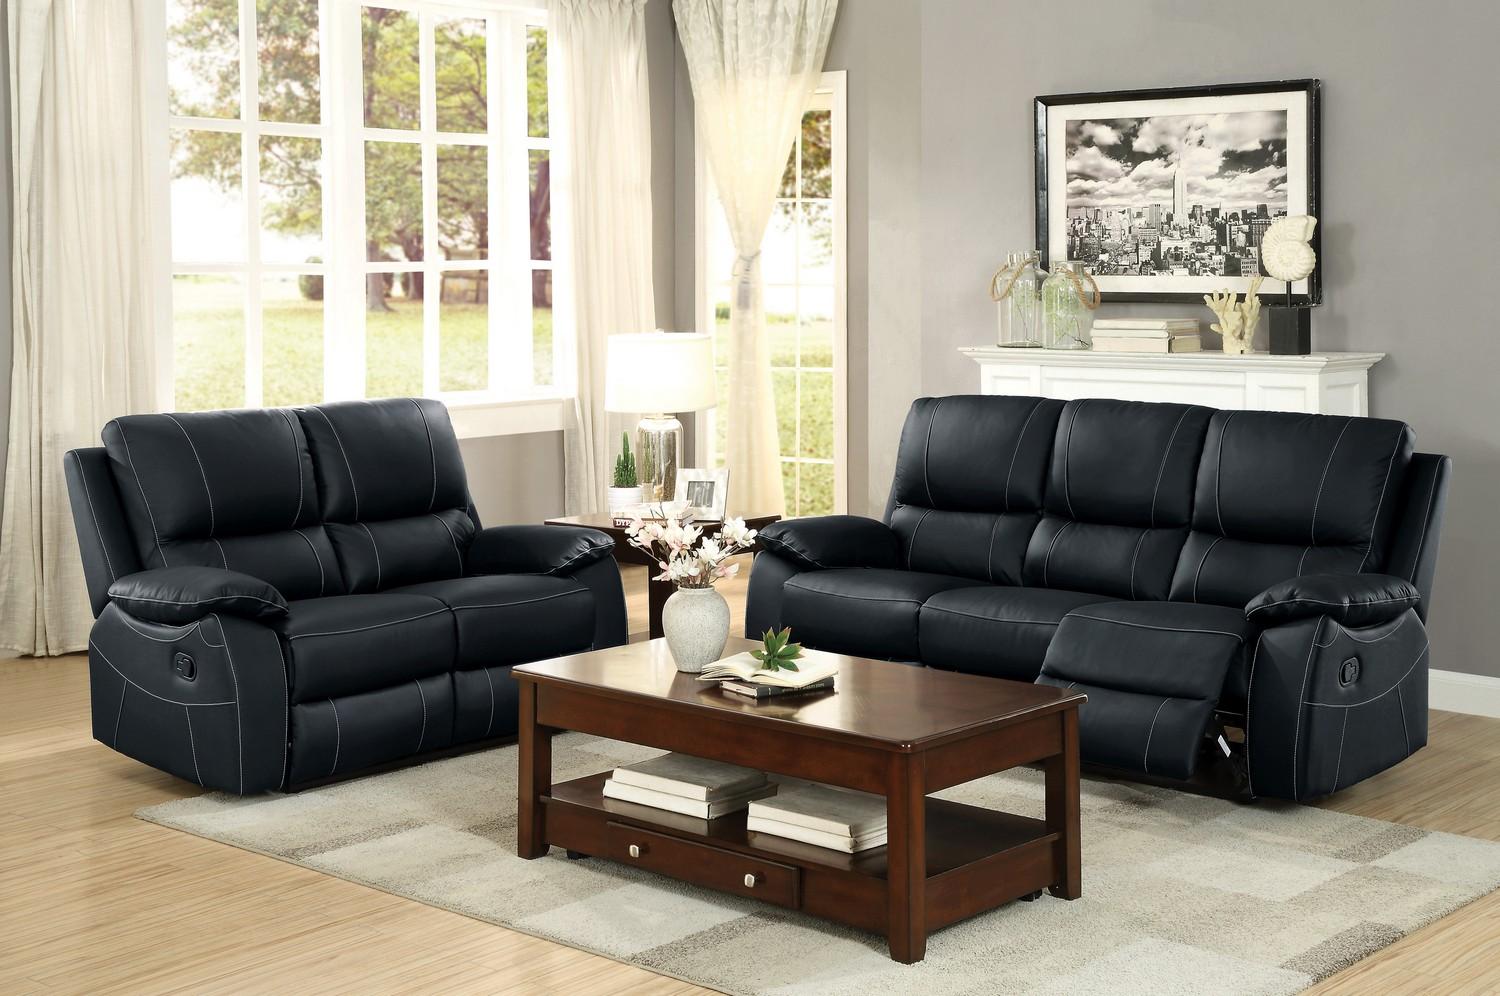 Contemporary, Modern Recliner Sofa Set Greeley 8325BLK-3+2-Greeley in Black Top grain leather